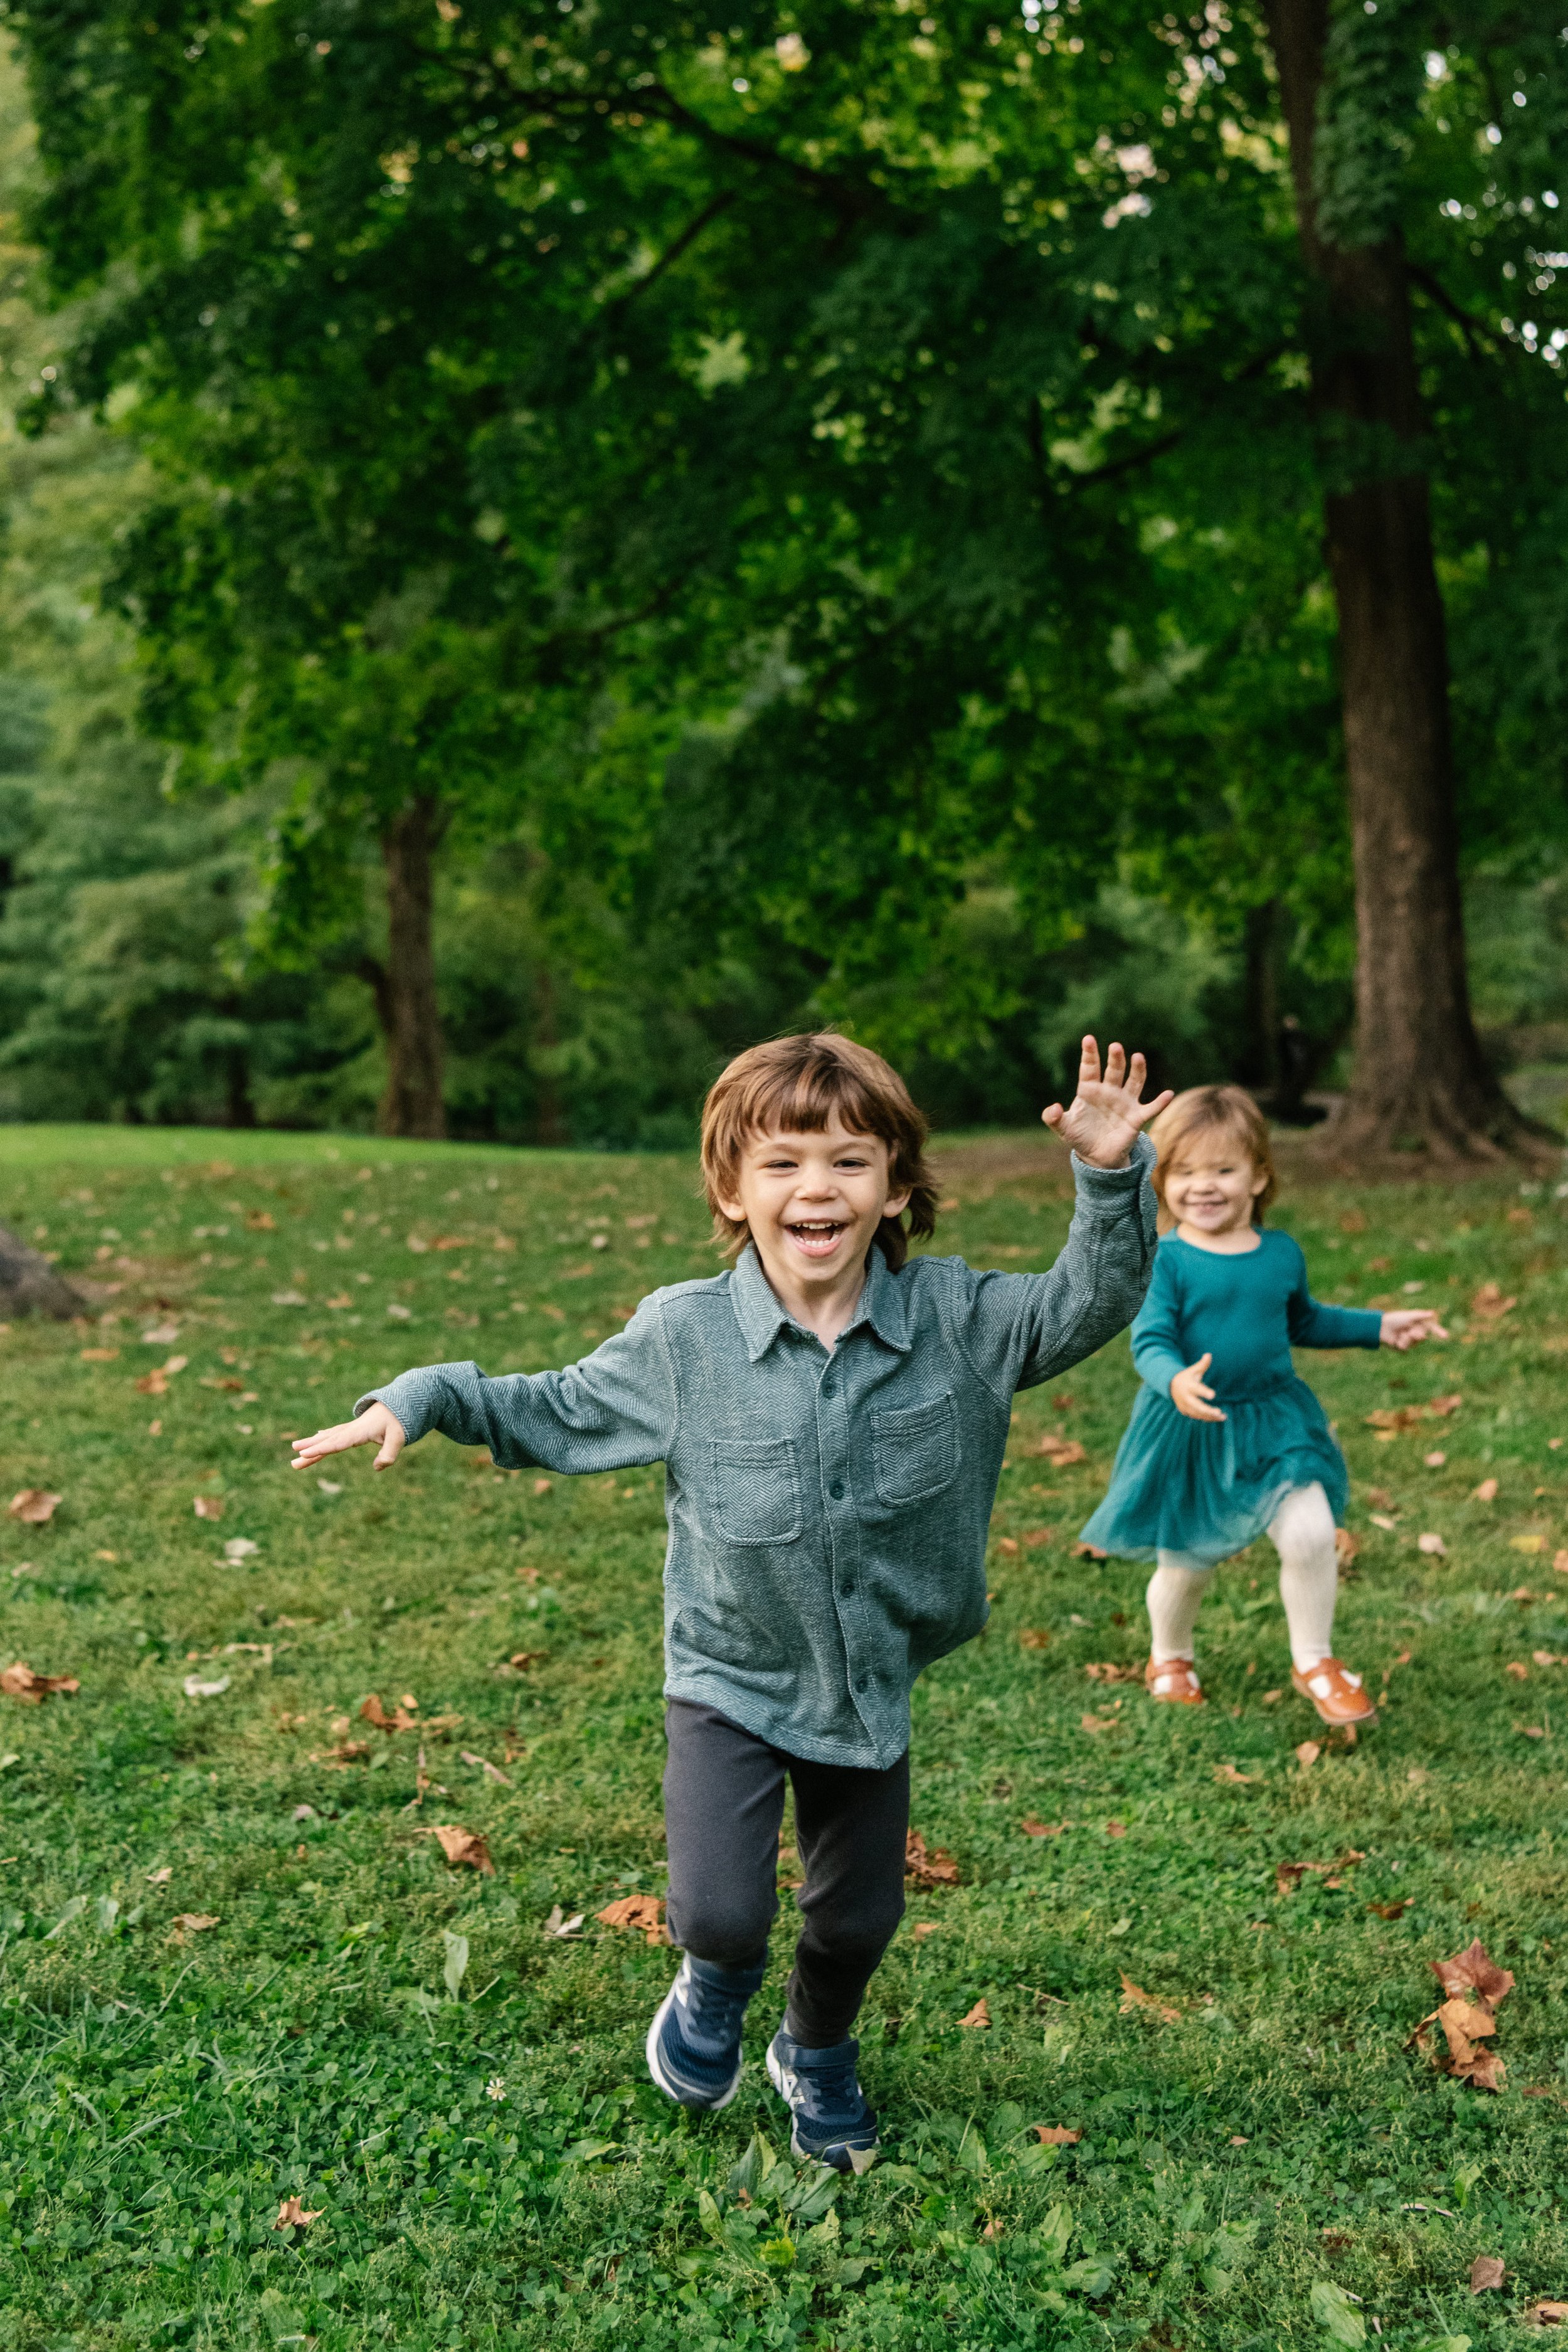  A silly picture of a family playing in central park in the fall time by Nicole Hawkins Photography. silly boy pictures NJ family photographer #NicoleHawkinsPhotography #NicoleHawkinsFamilies #NJphotographers #familyphotos #CentralParkPhotography #Ce